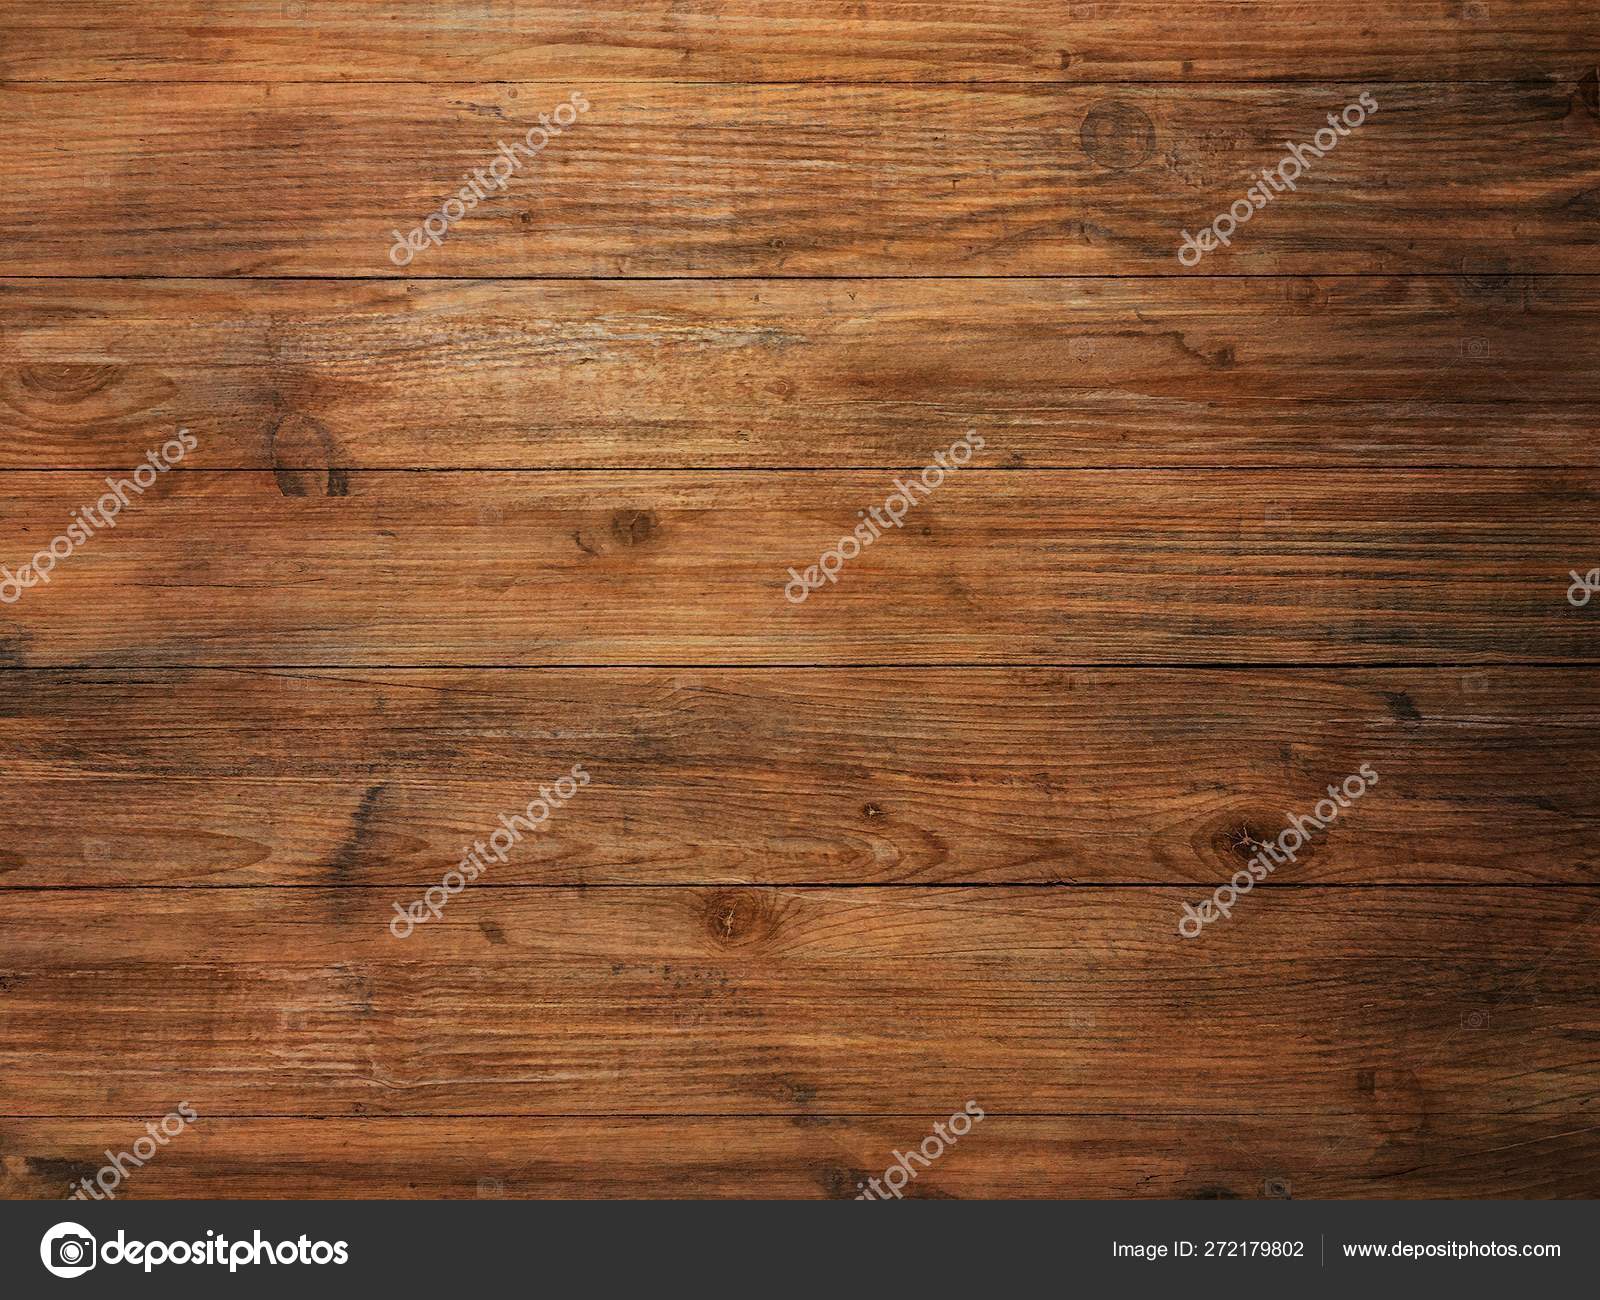 Brown wood texture, dark wooden abstract background. Stock Photo by  ©t_trifonoff 272179802